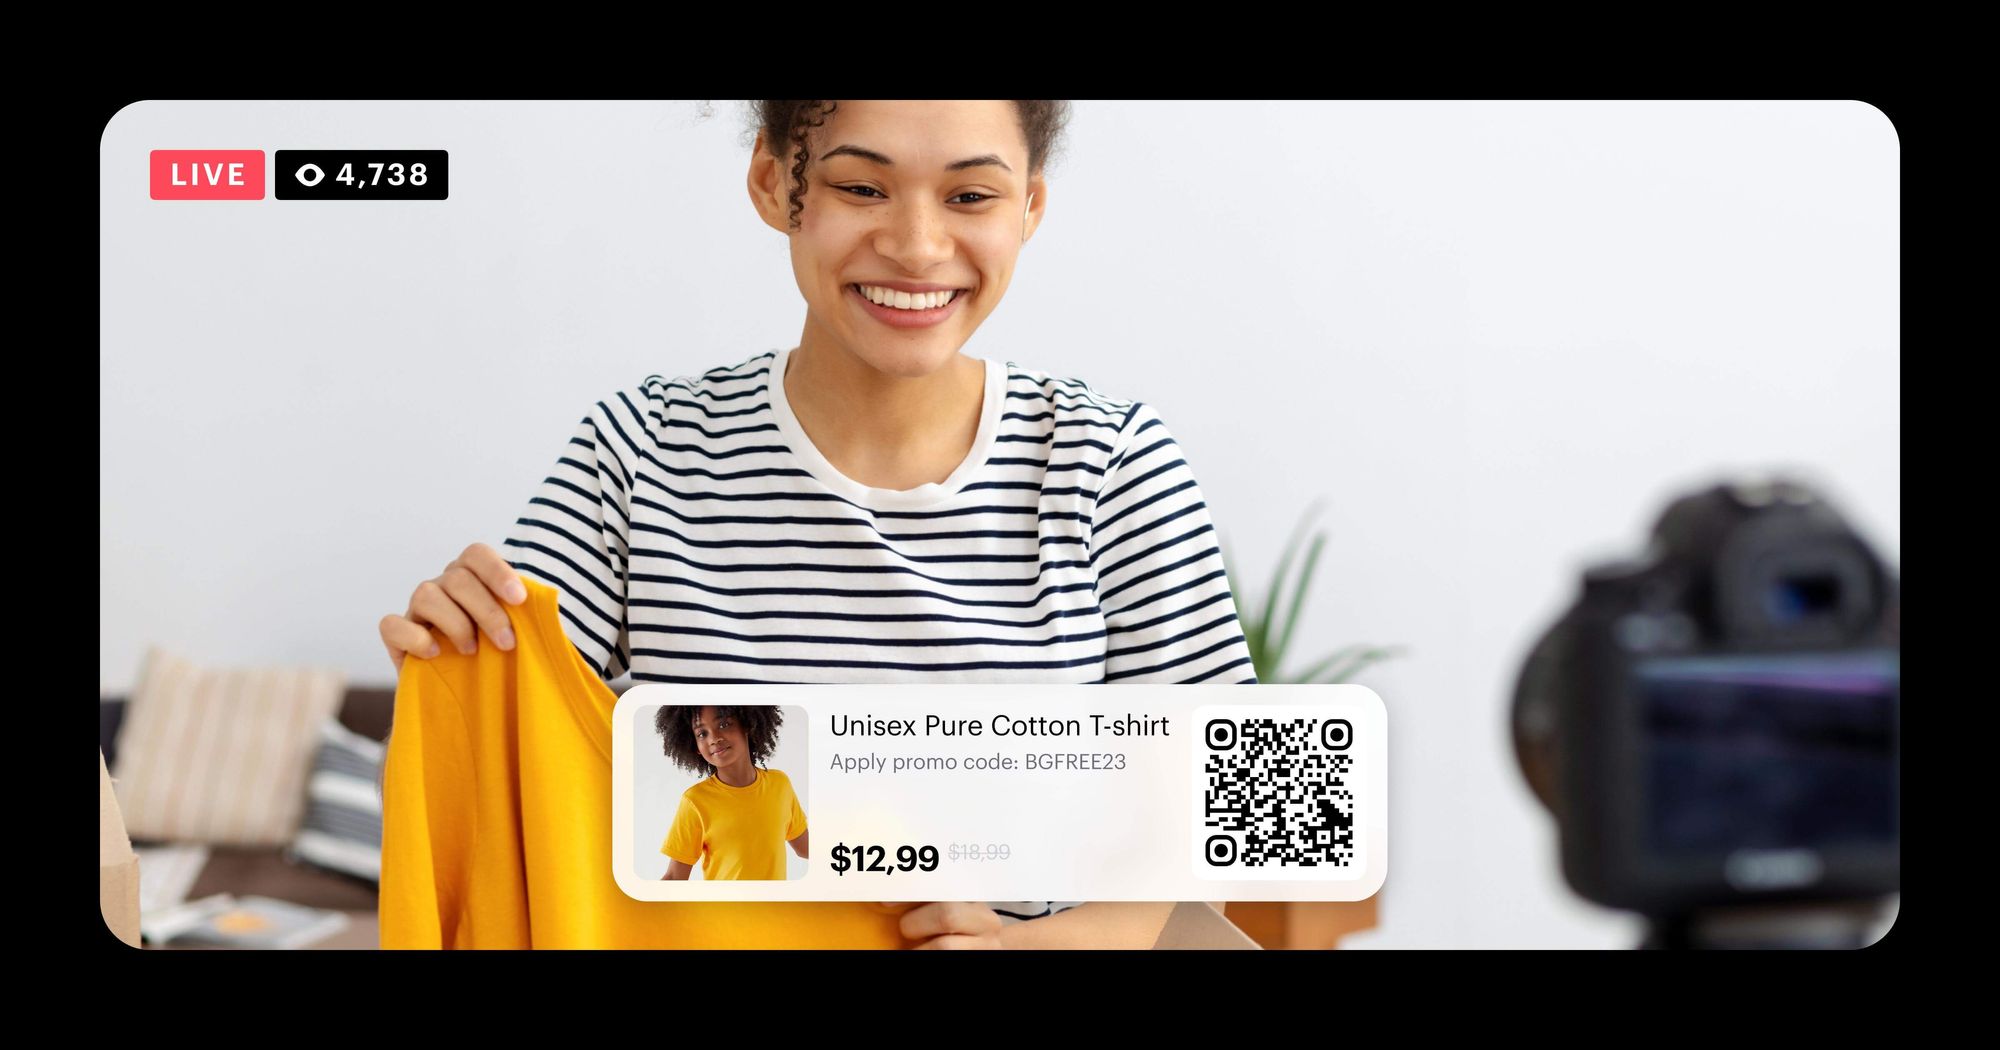 Live commerce: everything you need to know